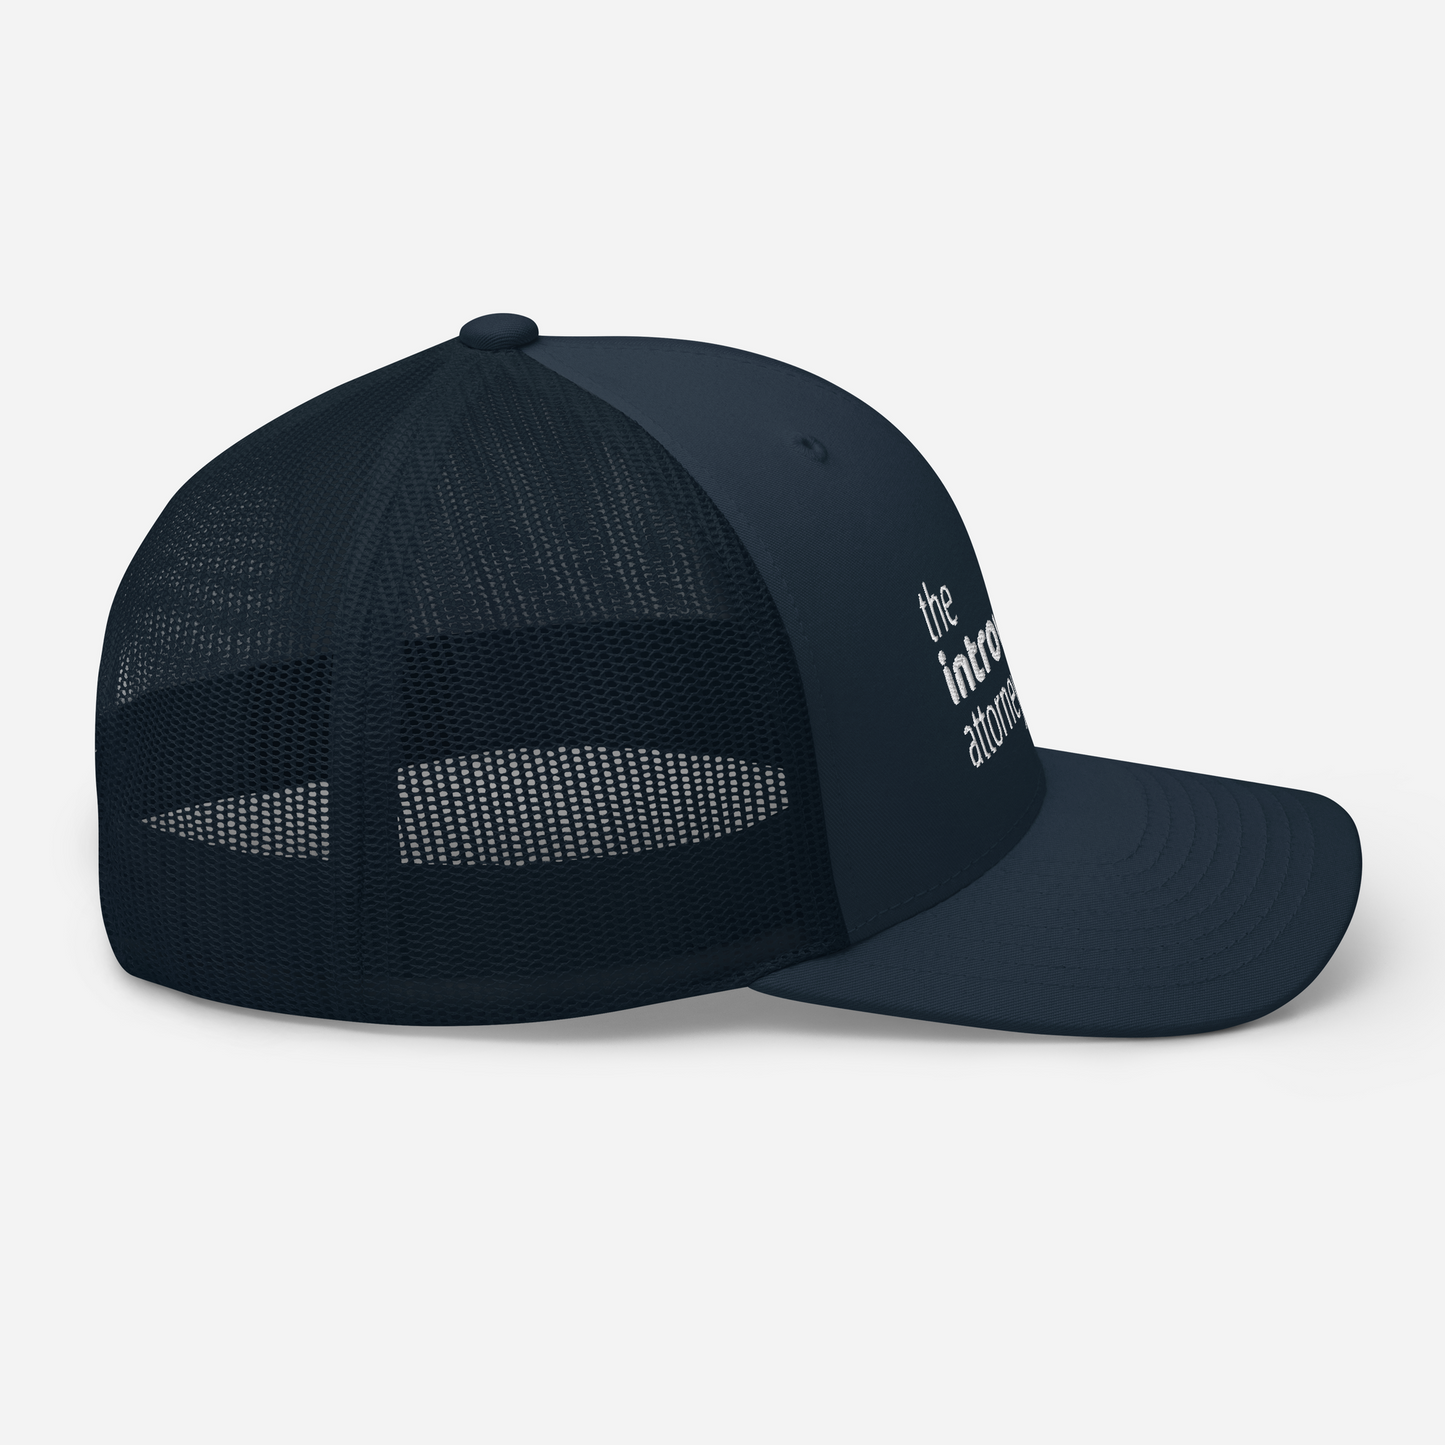 The Introverted Attorney Trucker Cap